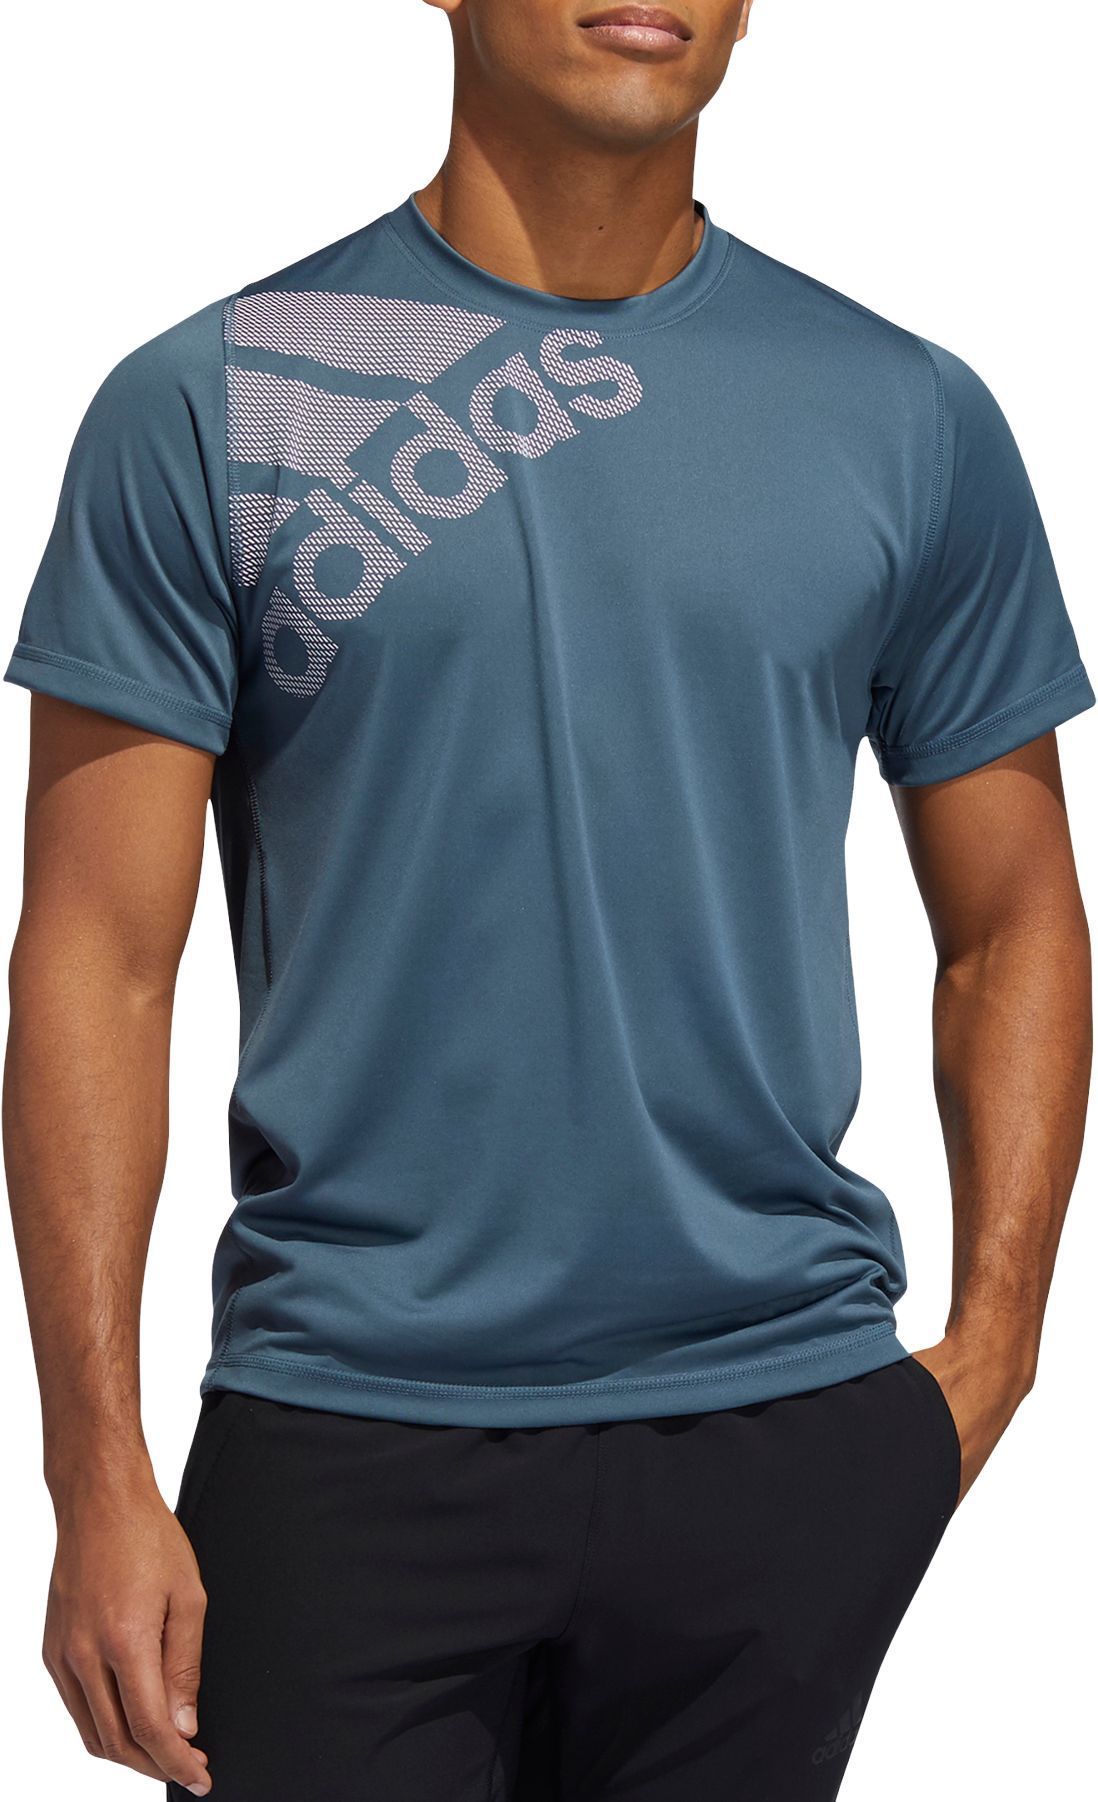 adidas Men's FreeLift Badge Of Sport Graphic T-Shirt, Size: Small, Blue -   thin fitness Men